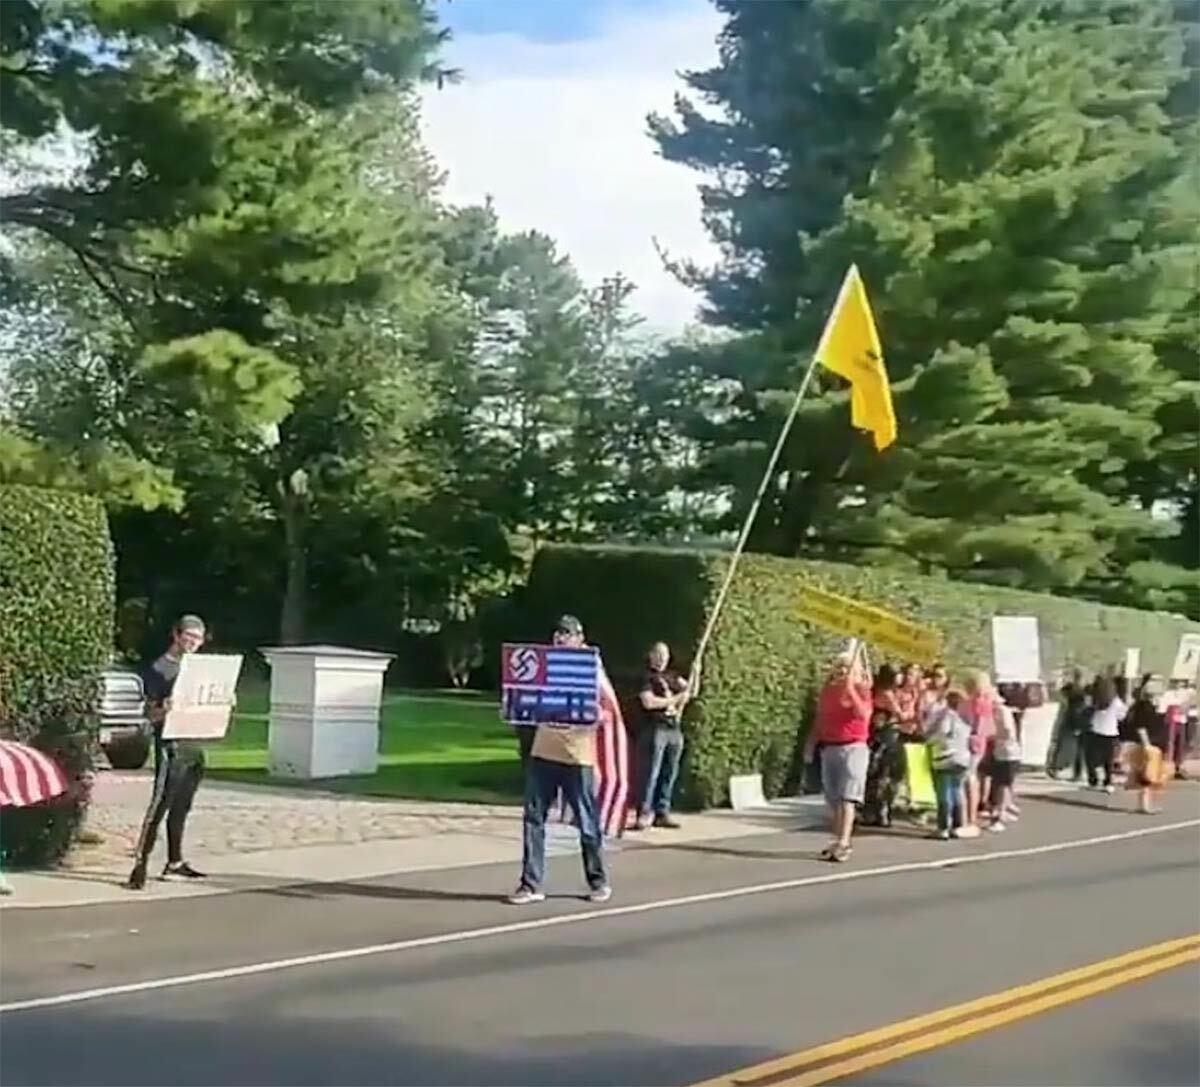 An image of a protestor, holding a sign with a swastika on it, in front of Northwell Health CEO Michael Dowling&#39;s house from this past weekend. Photo via Instagram.